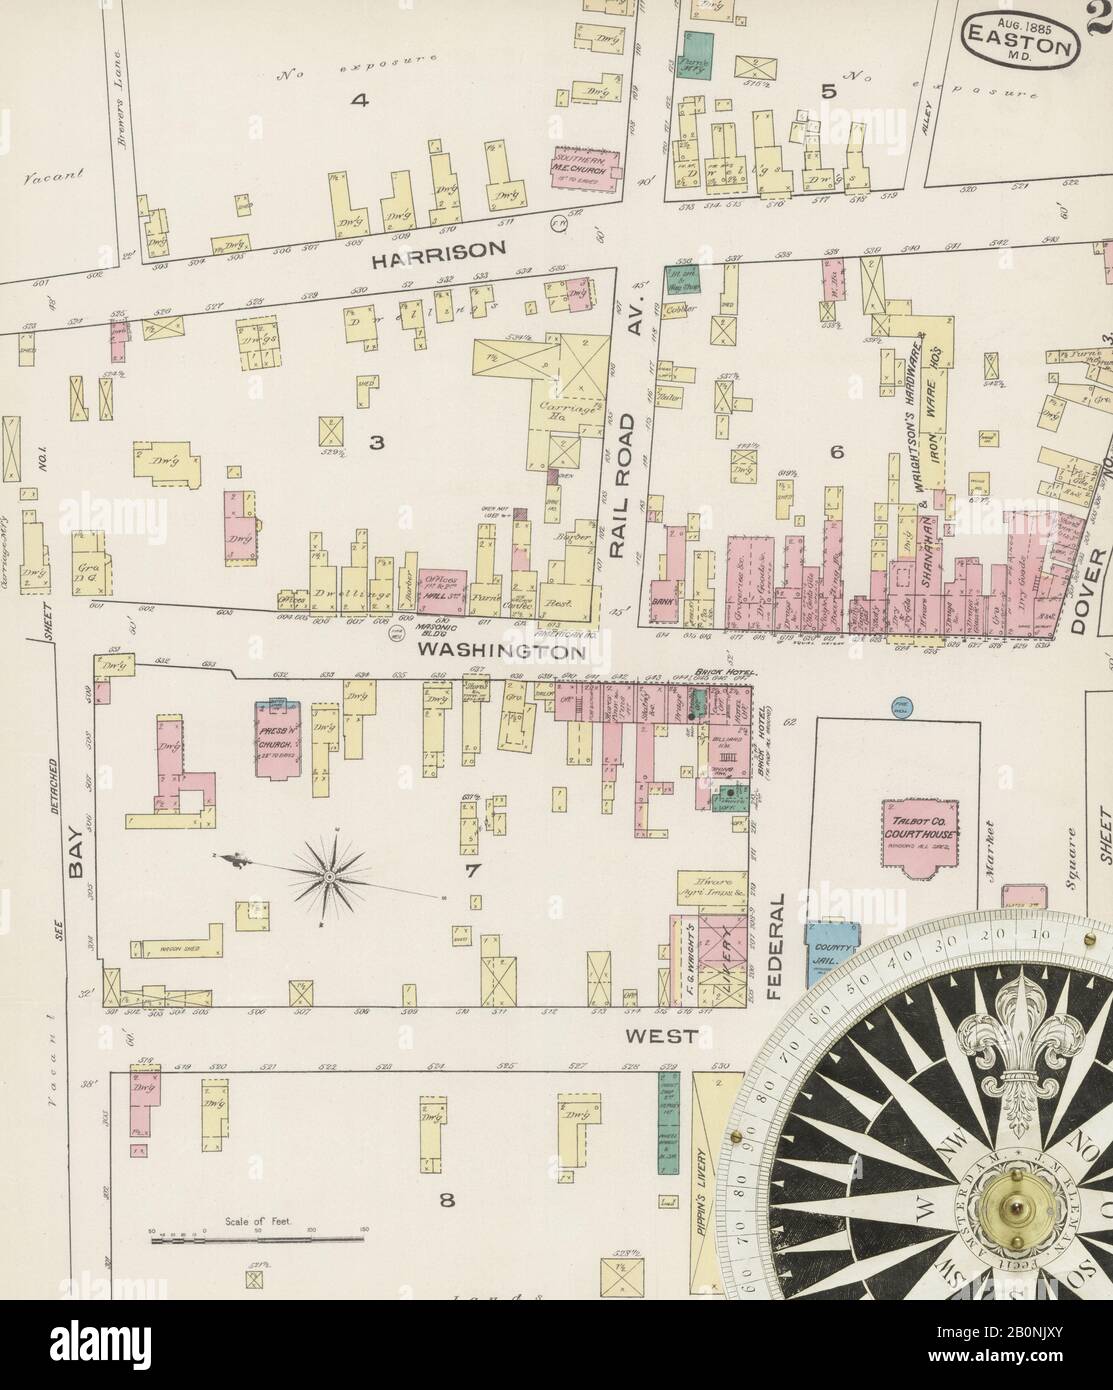 Image 2 of Sanborn Fire Insurance Map from Easton, Talbot County, Maryland. Aug 1885. 4 Sheet(s), America, street map with a Nineteenth Century compass Stock Photo